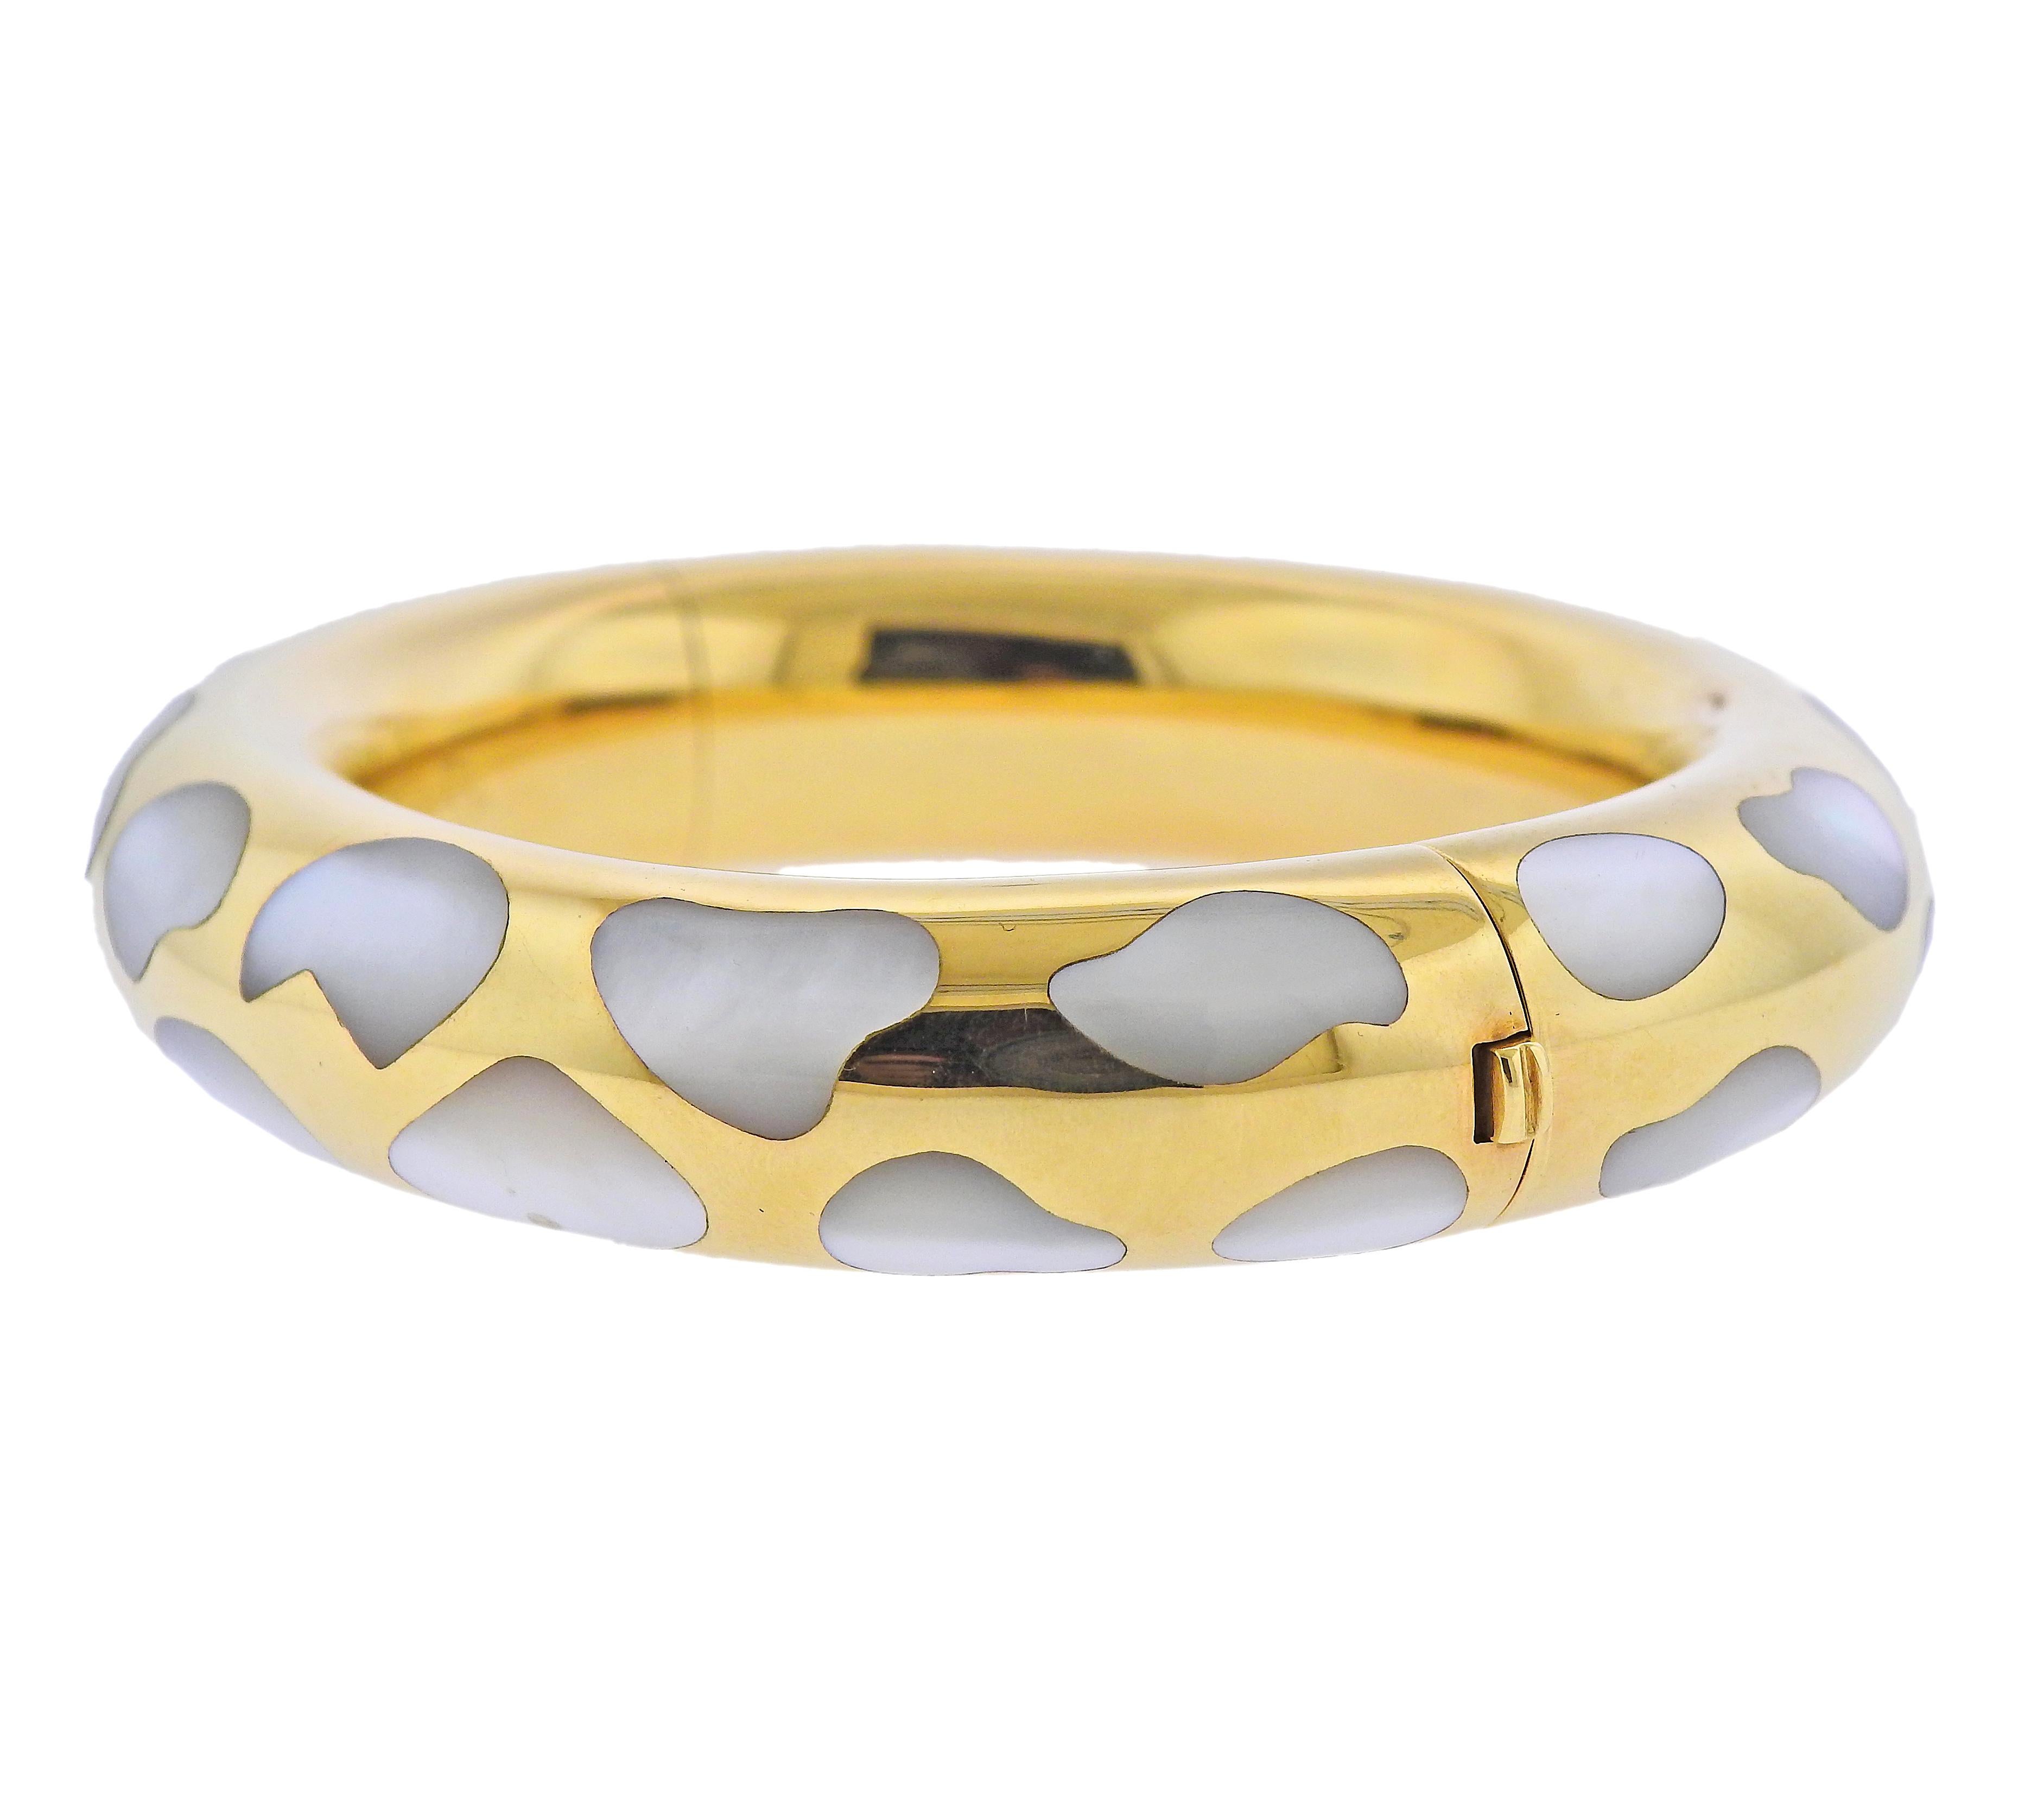 18k yellow gold bangle bracelet by Tiffany & Co, with mother of pearl inlay. Bracelet will fit up to 7.25